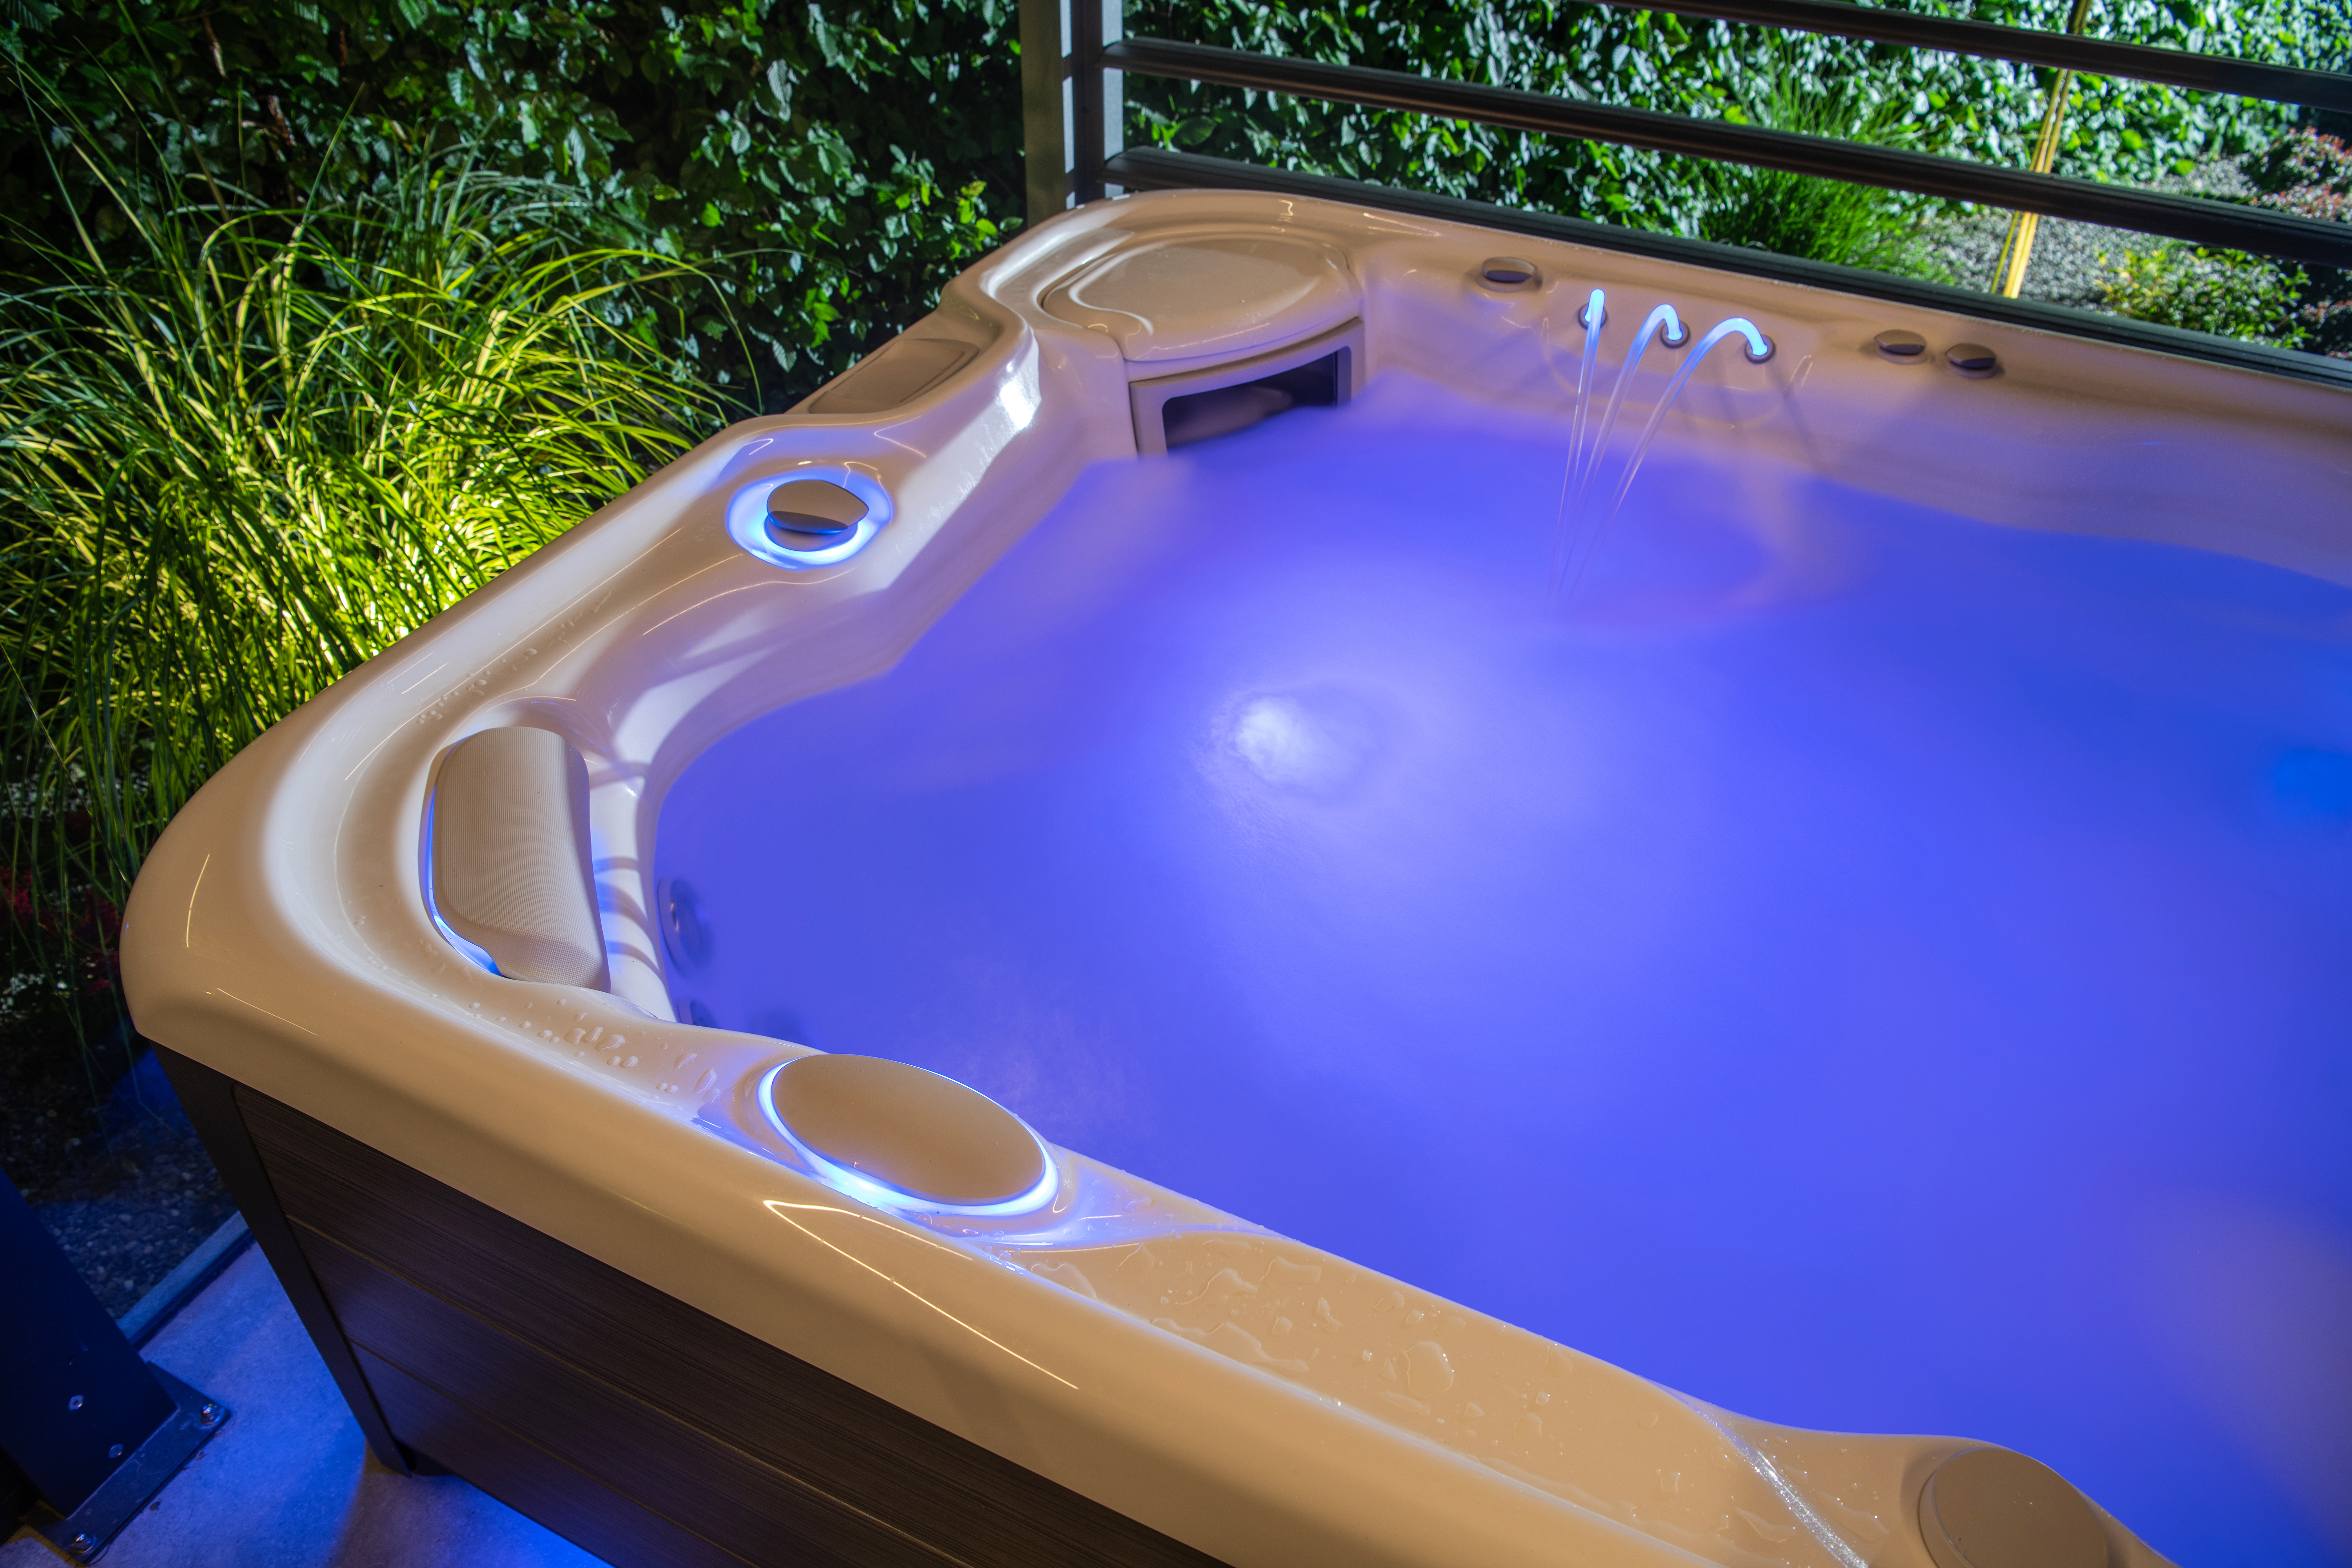 Top Reasons to Opt for Hot Tub Removal Services